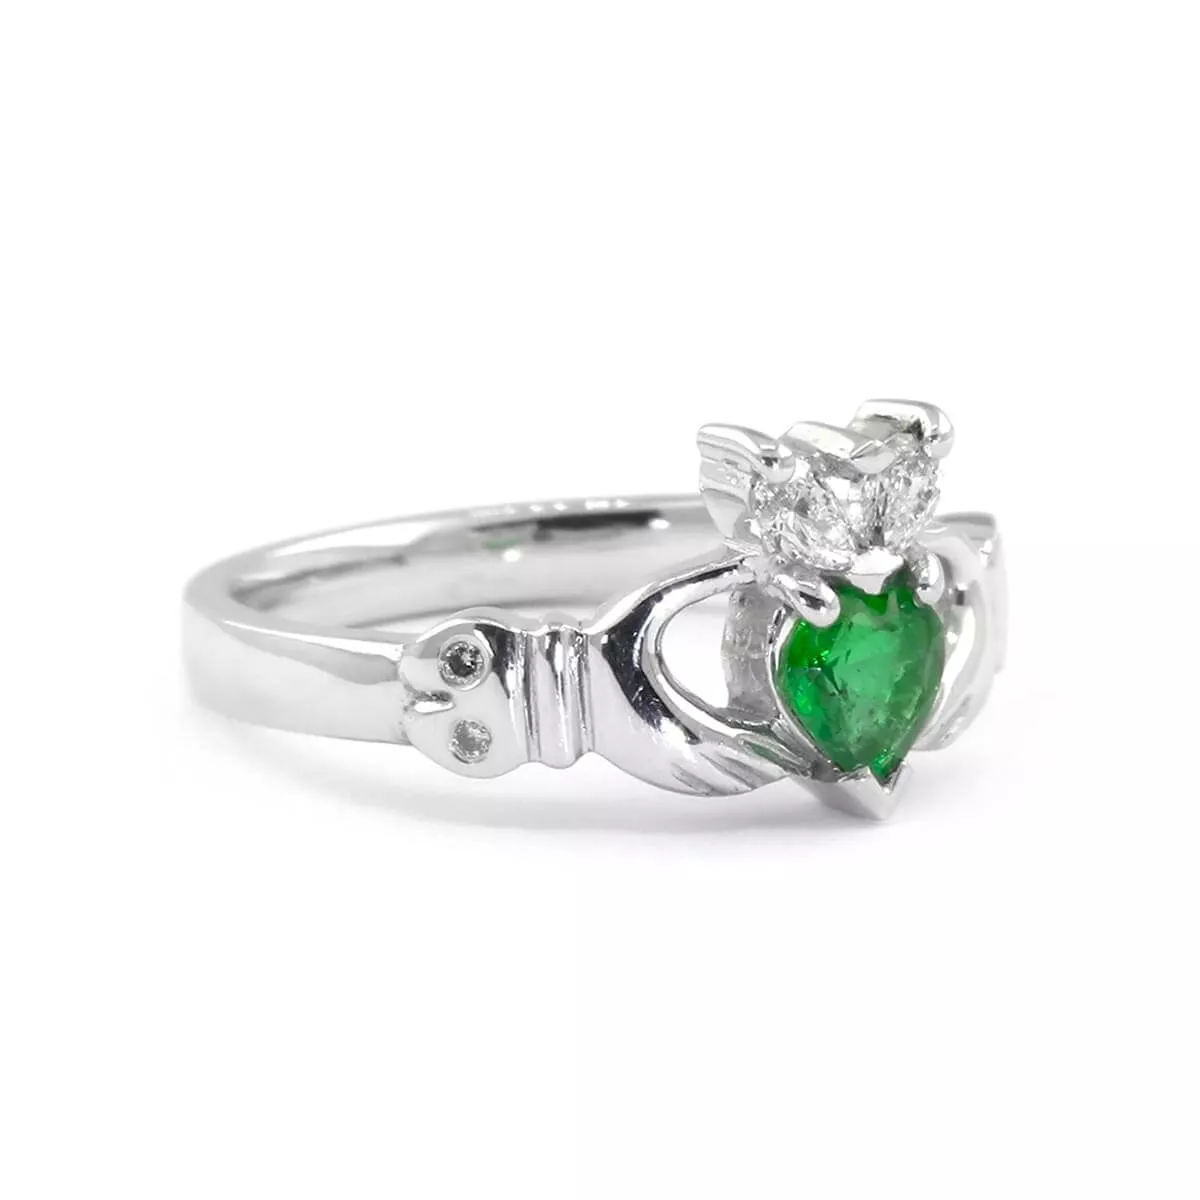 White Gold Claddagh Ring And Emerald 4 4